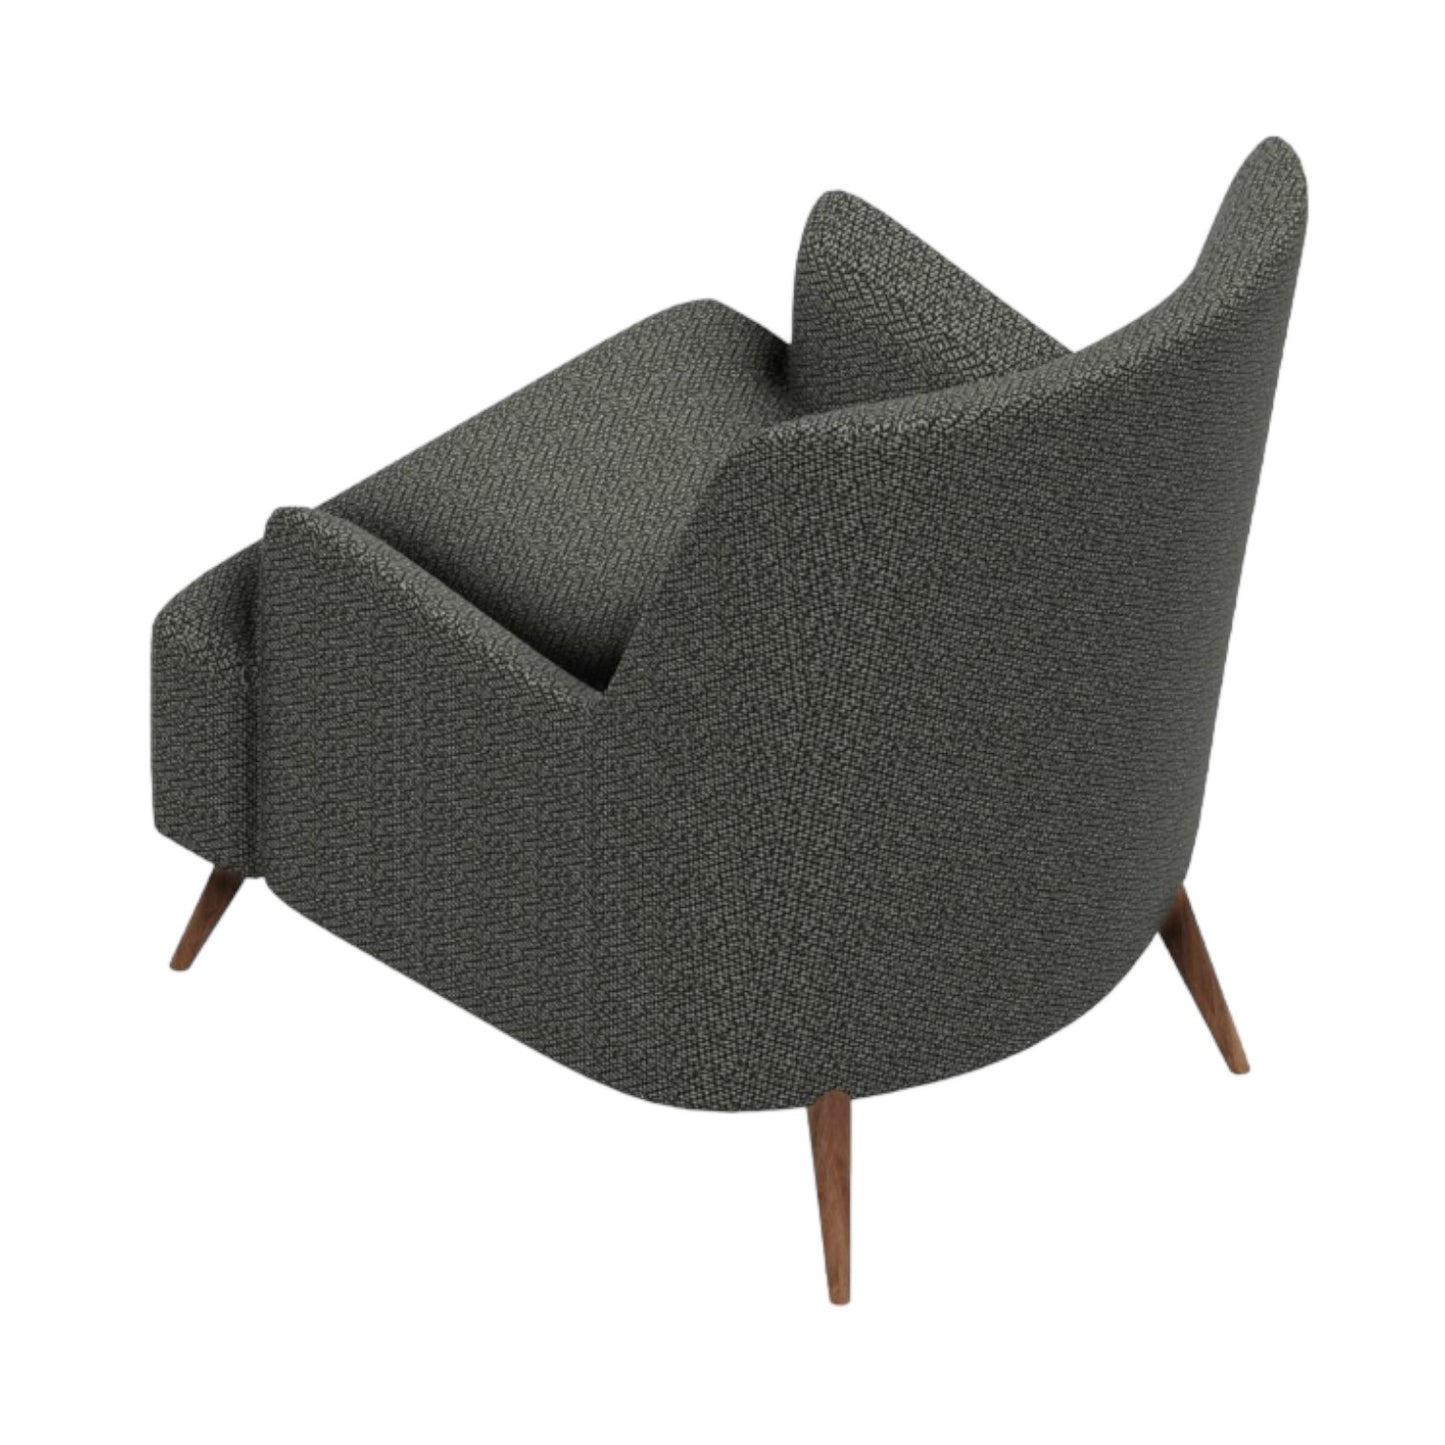 Picture of Dulce Armchair Black